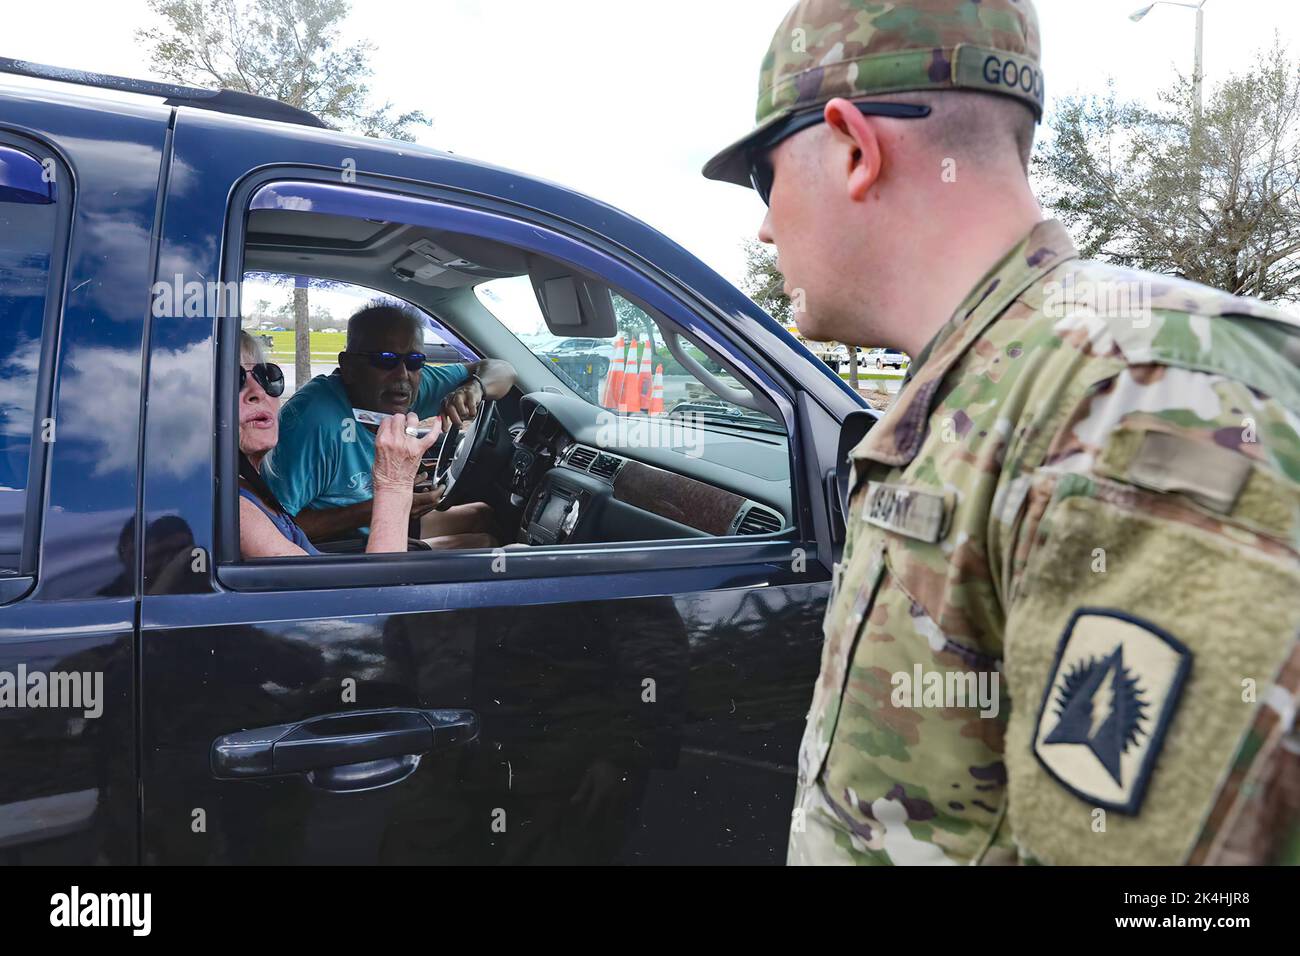 Couple stops to say thank you to the National Guard Soldiers providing them with food and water after Hurricane Ian’s devastation in Port Charlotte, Fla. Oct. 1, 2022. The Florida National Guard has been assisting citizens with Hurricane Ian relief. Stock Photo